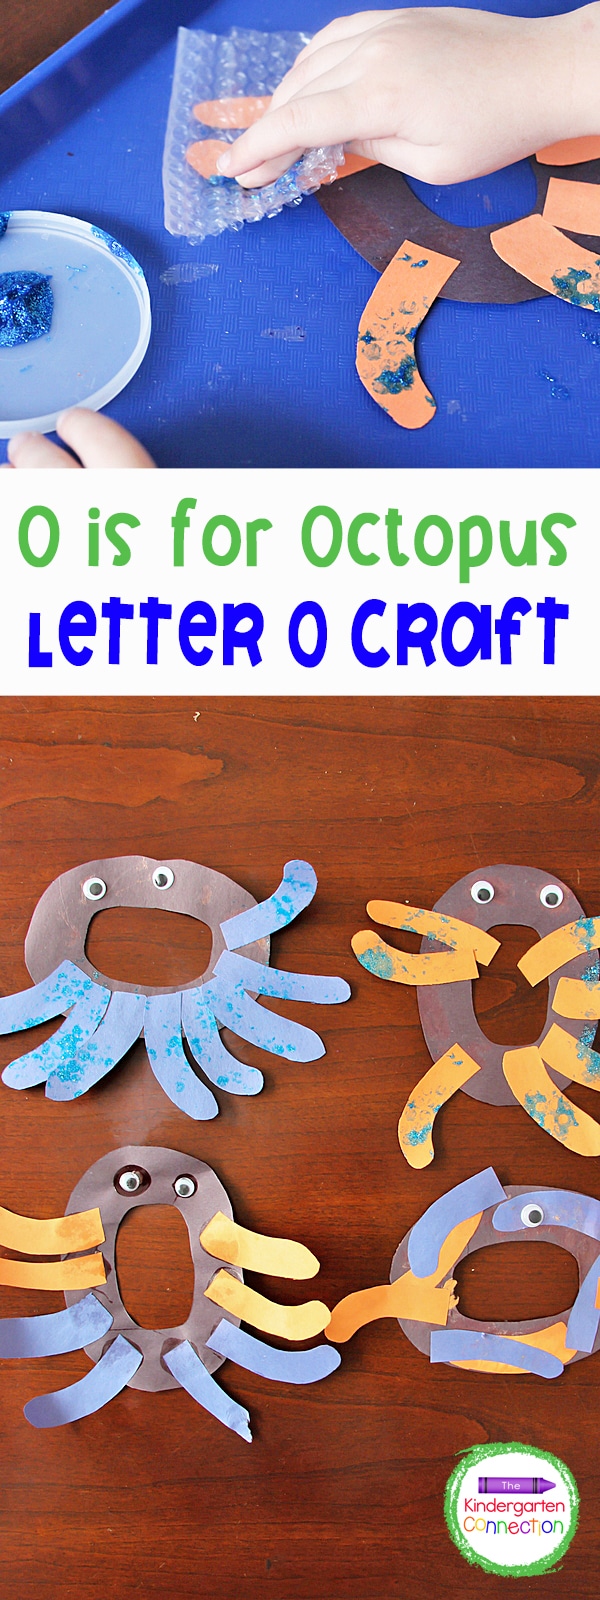 This letter O craft is a favorite! This O is for Octopus Kindergarten Letter Craft is easy to assemble and great for fine motor skills.